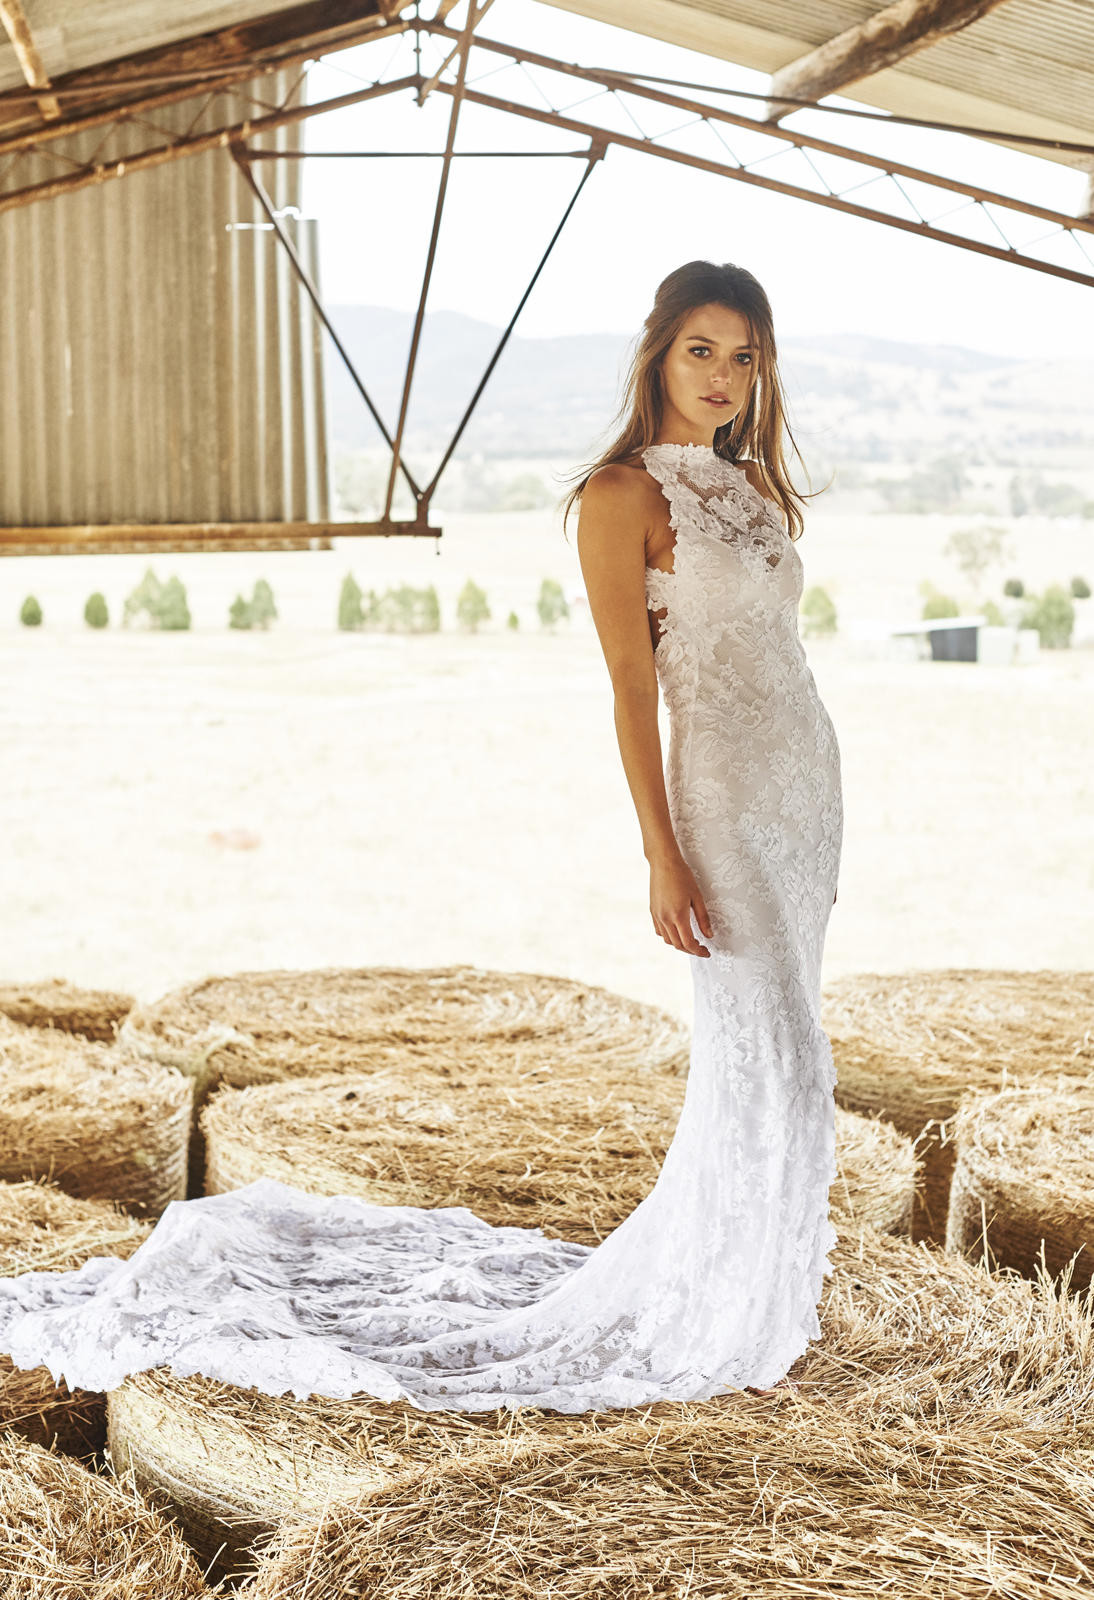 Country Chic Wedding Dresses
 Grace Loves Lace Wedding Dresses Rustic Wedding Chic